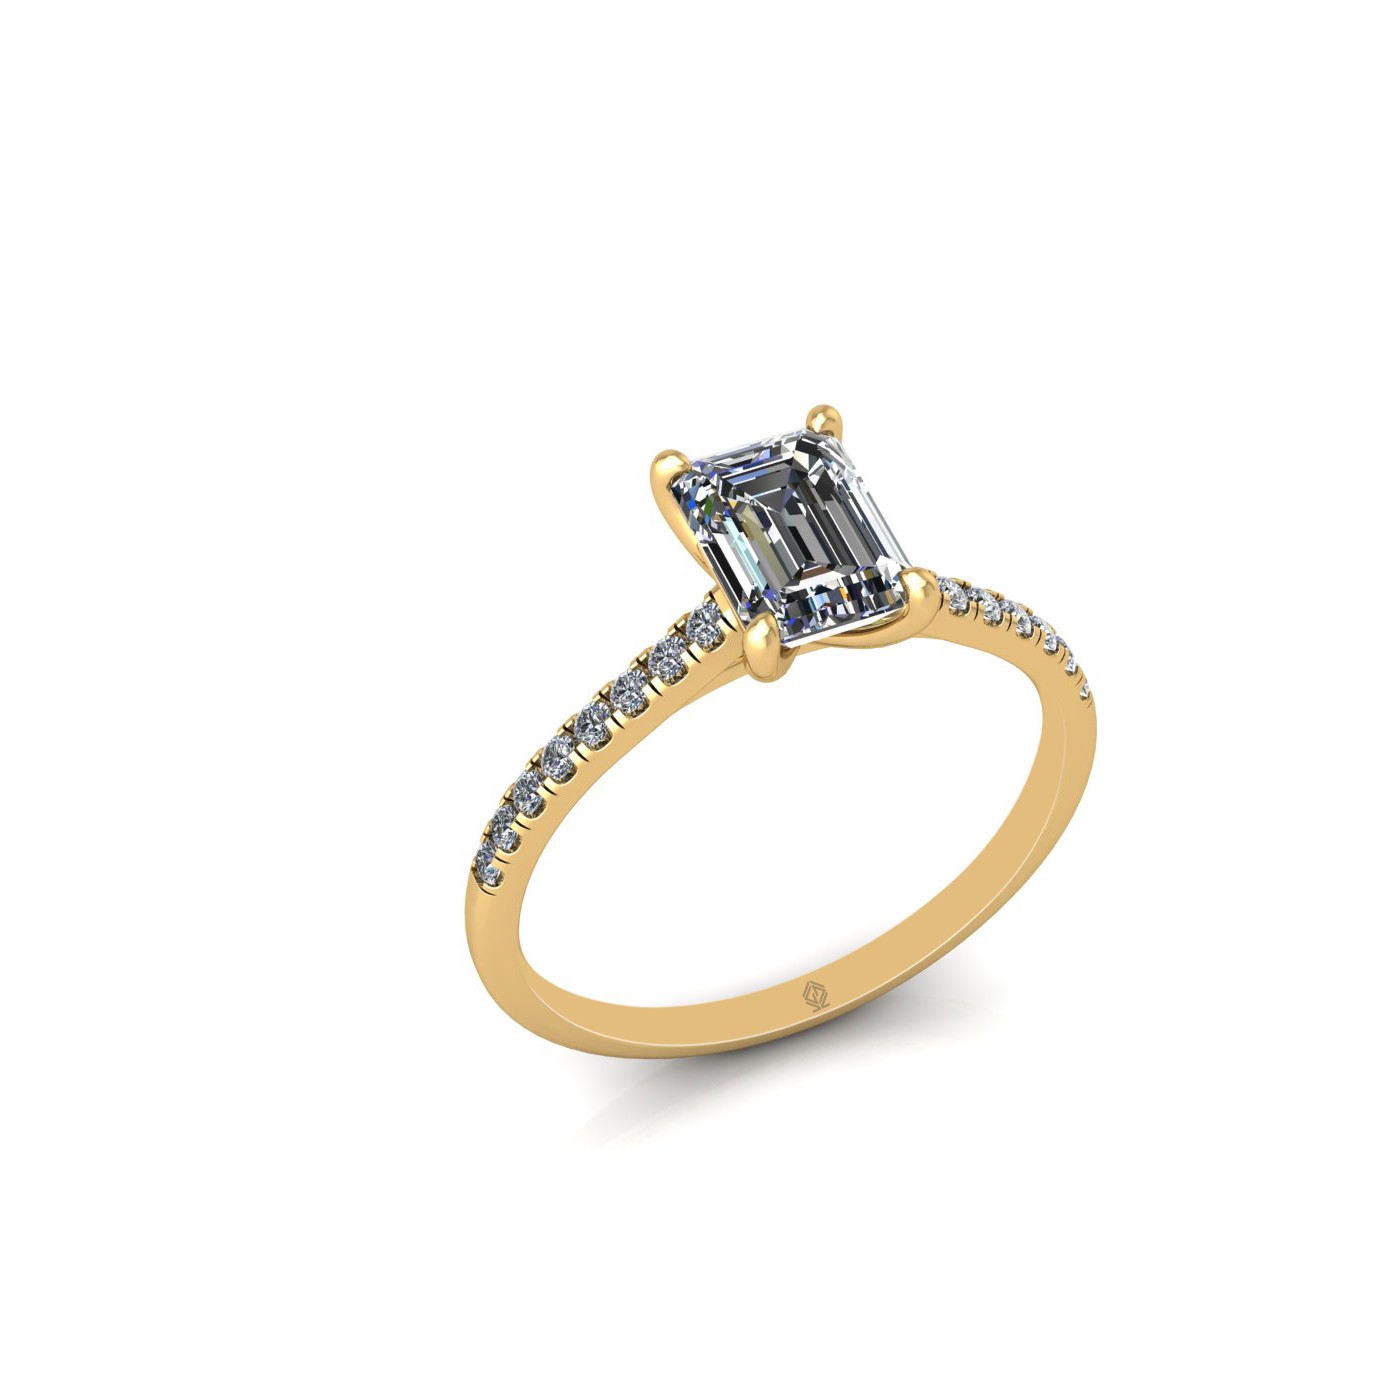 18k yellow gold 1.0ct 4 prongs emerald cut diamond engagement ring with whisper thin pavÉ set band